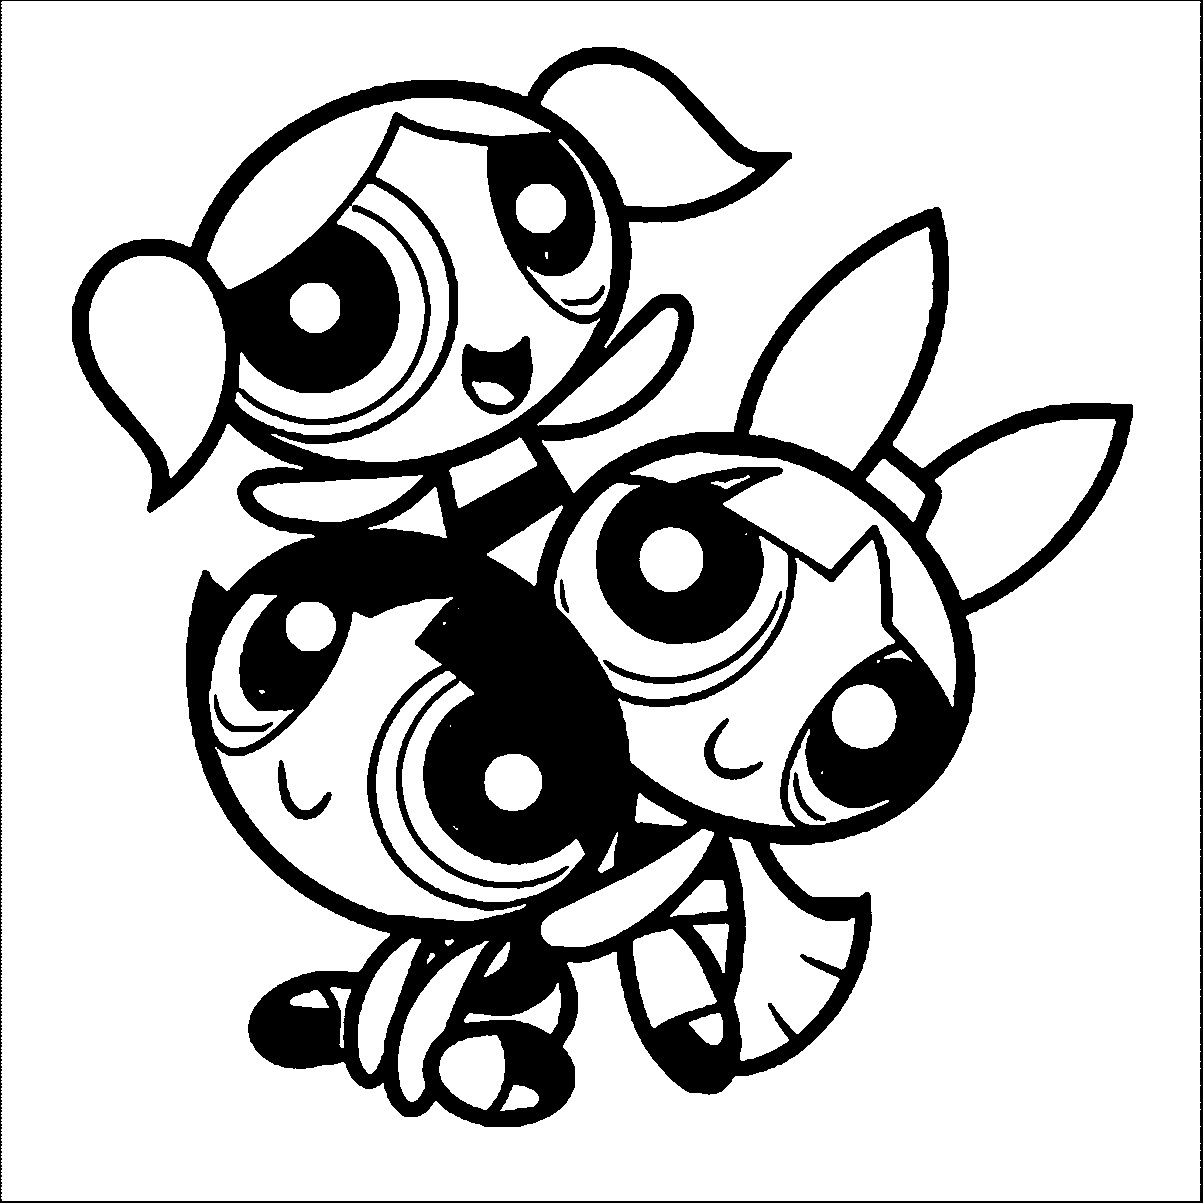 Power Puff Girls Coloring Sheets
 Powerpuff Girls Coloring Pages